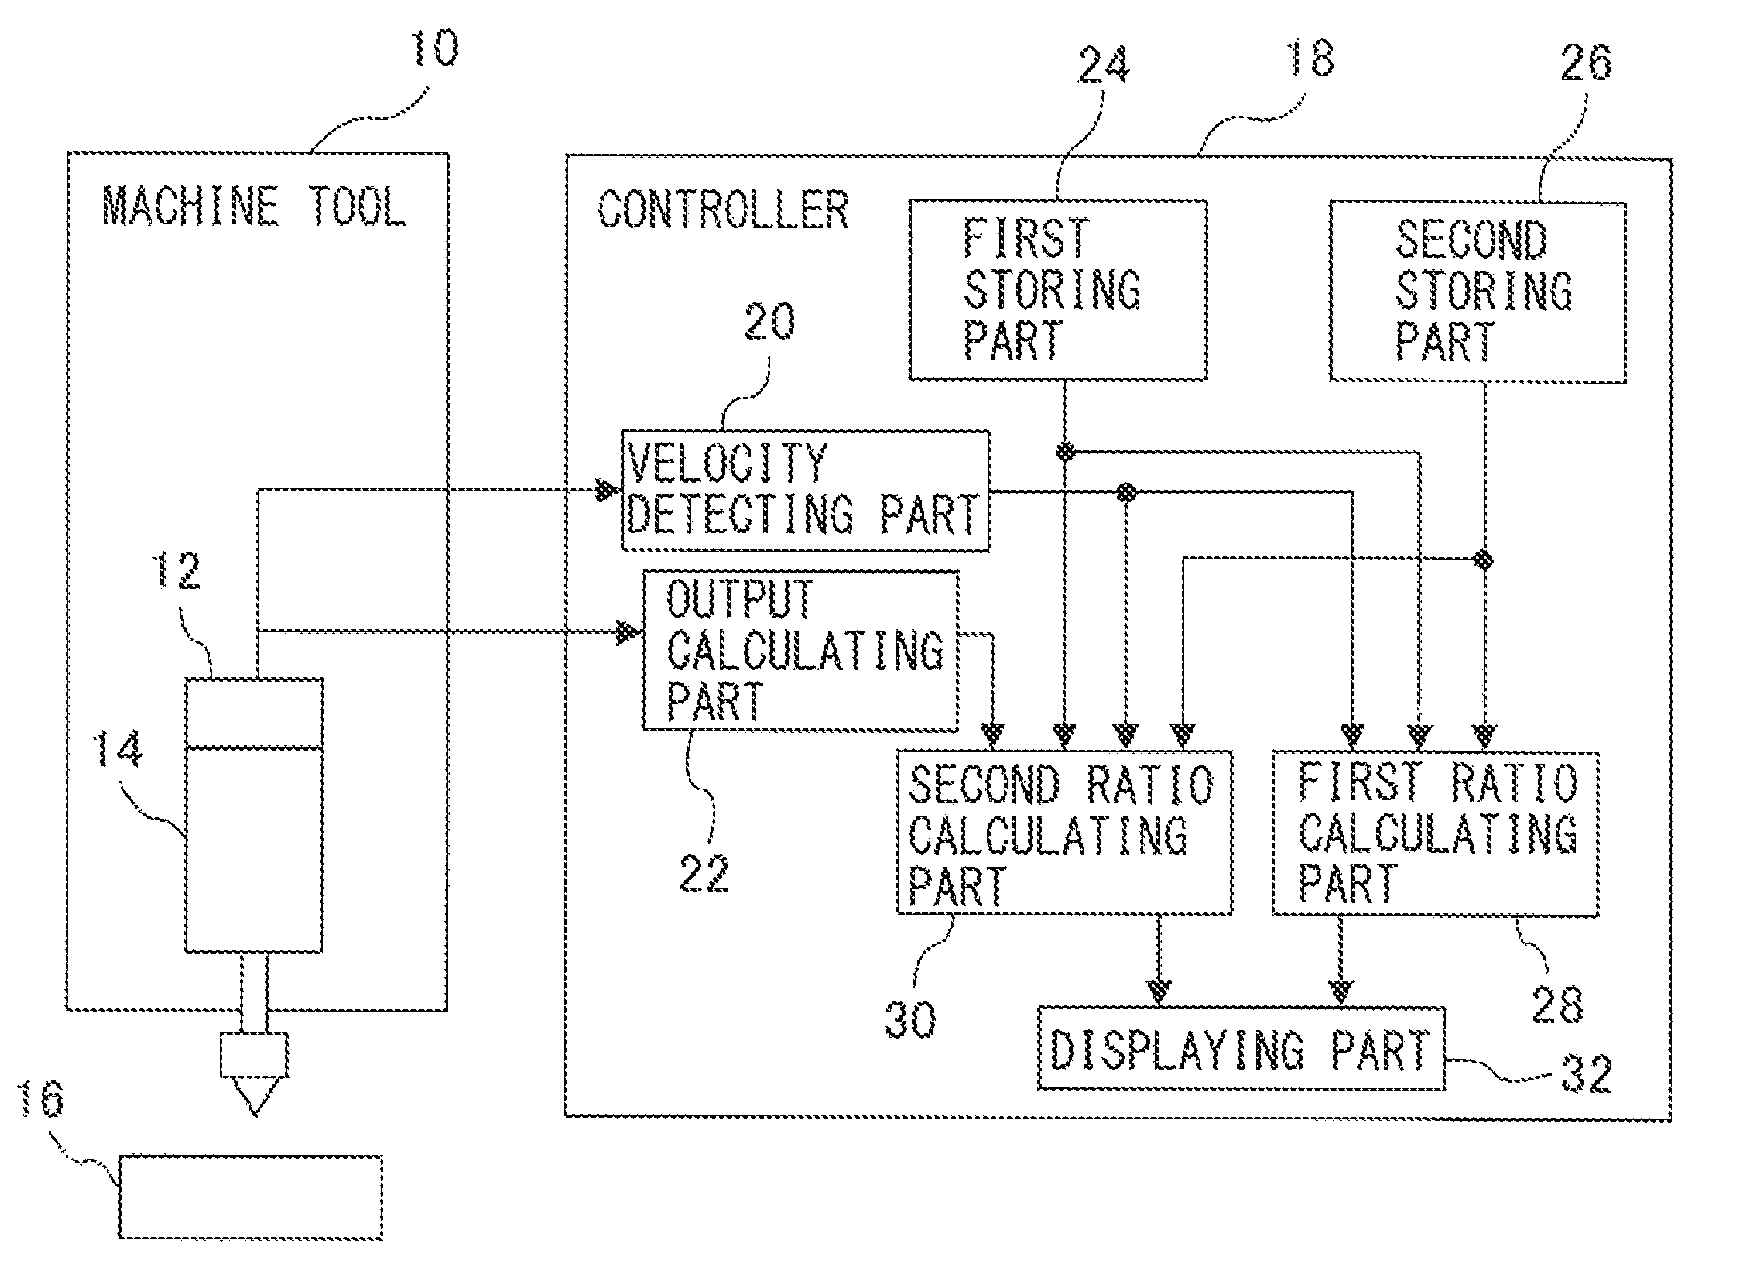 Controller having function for displaying motor load